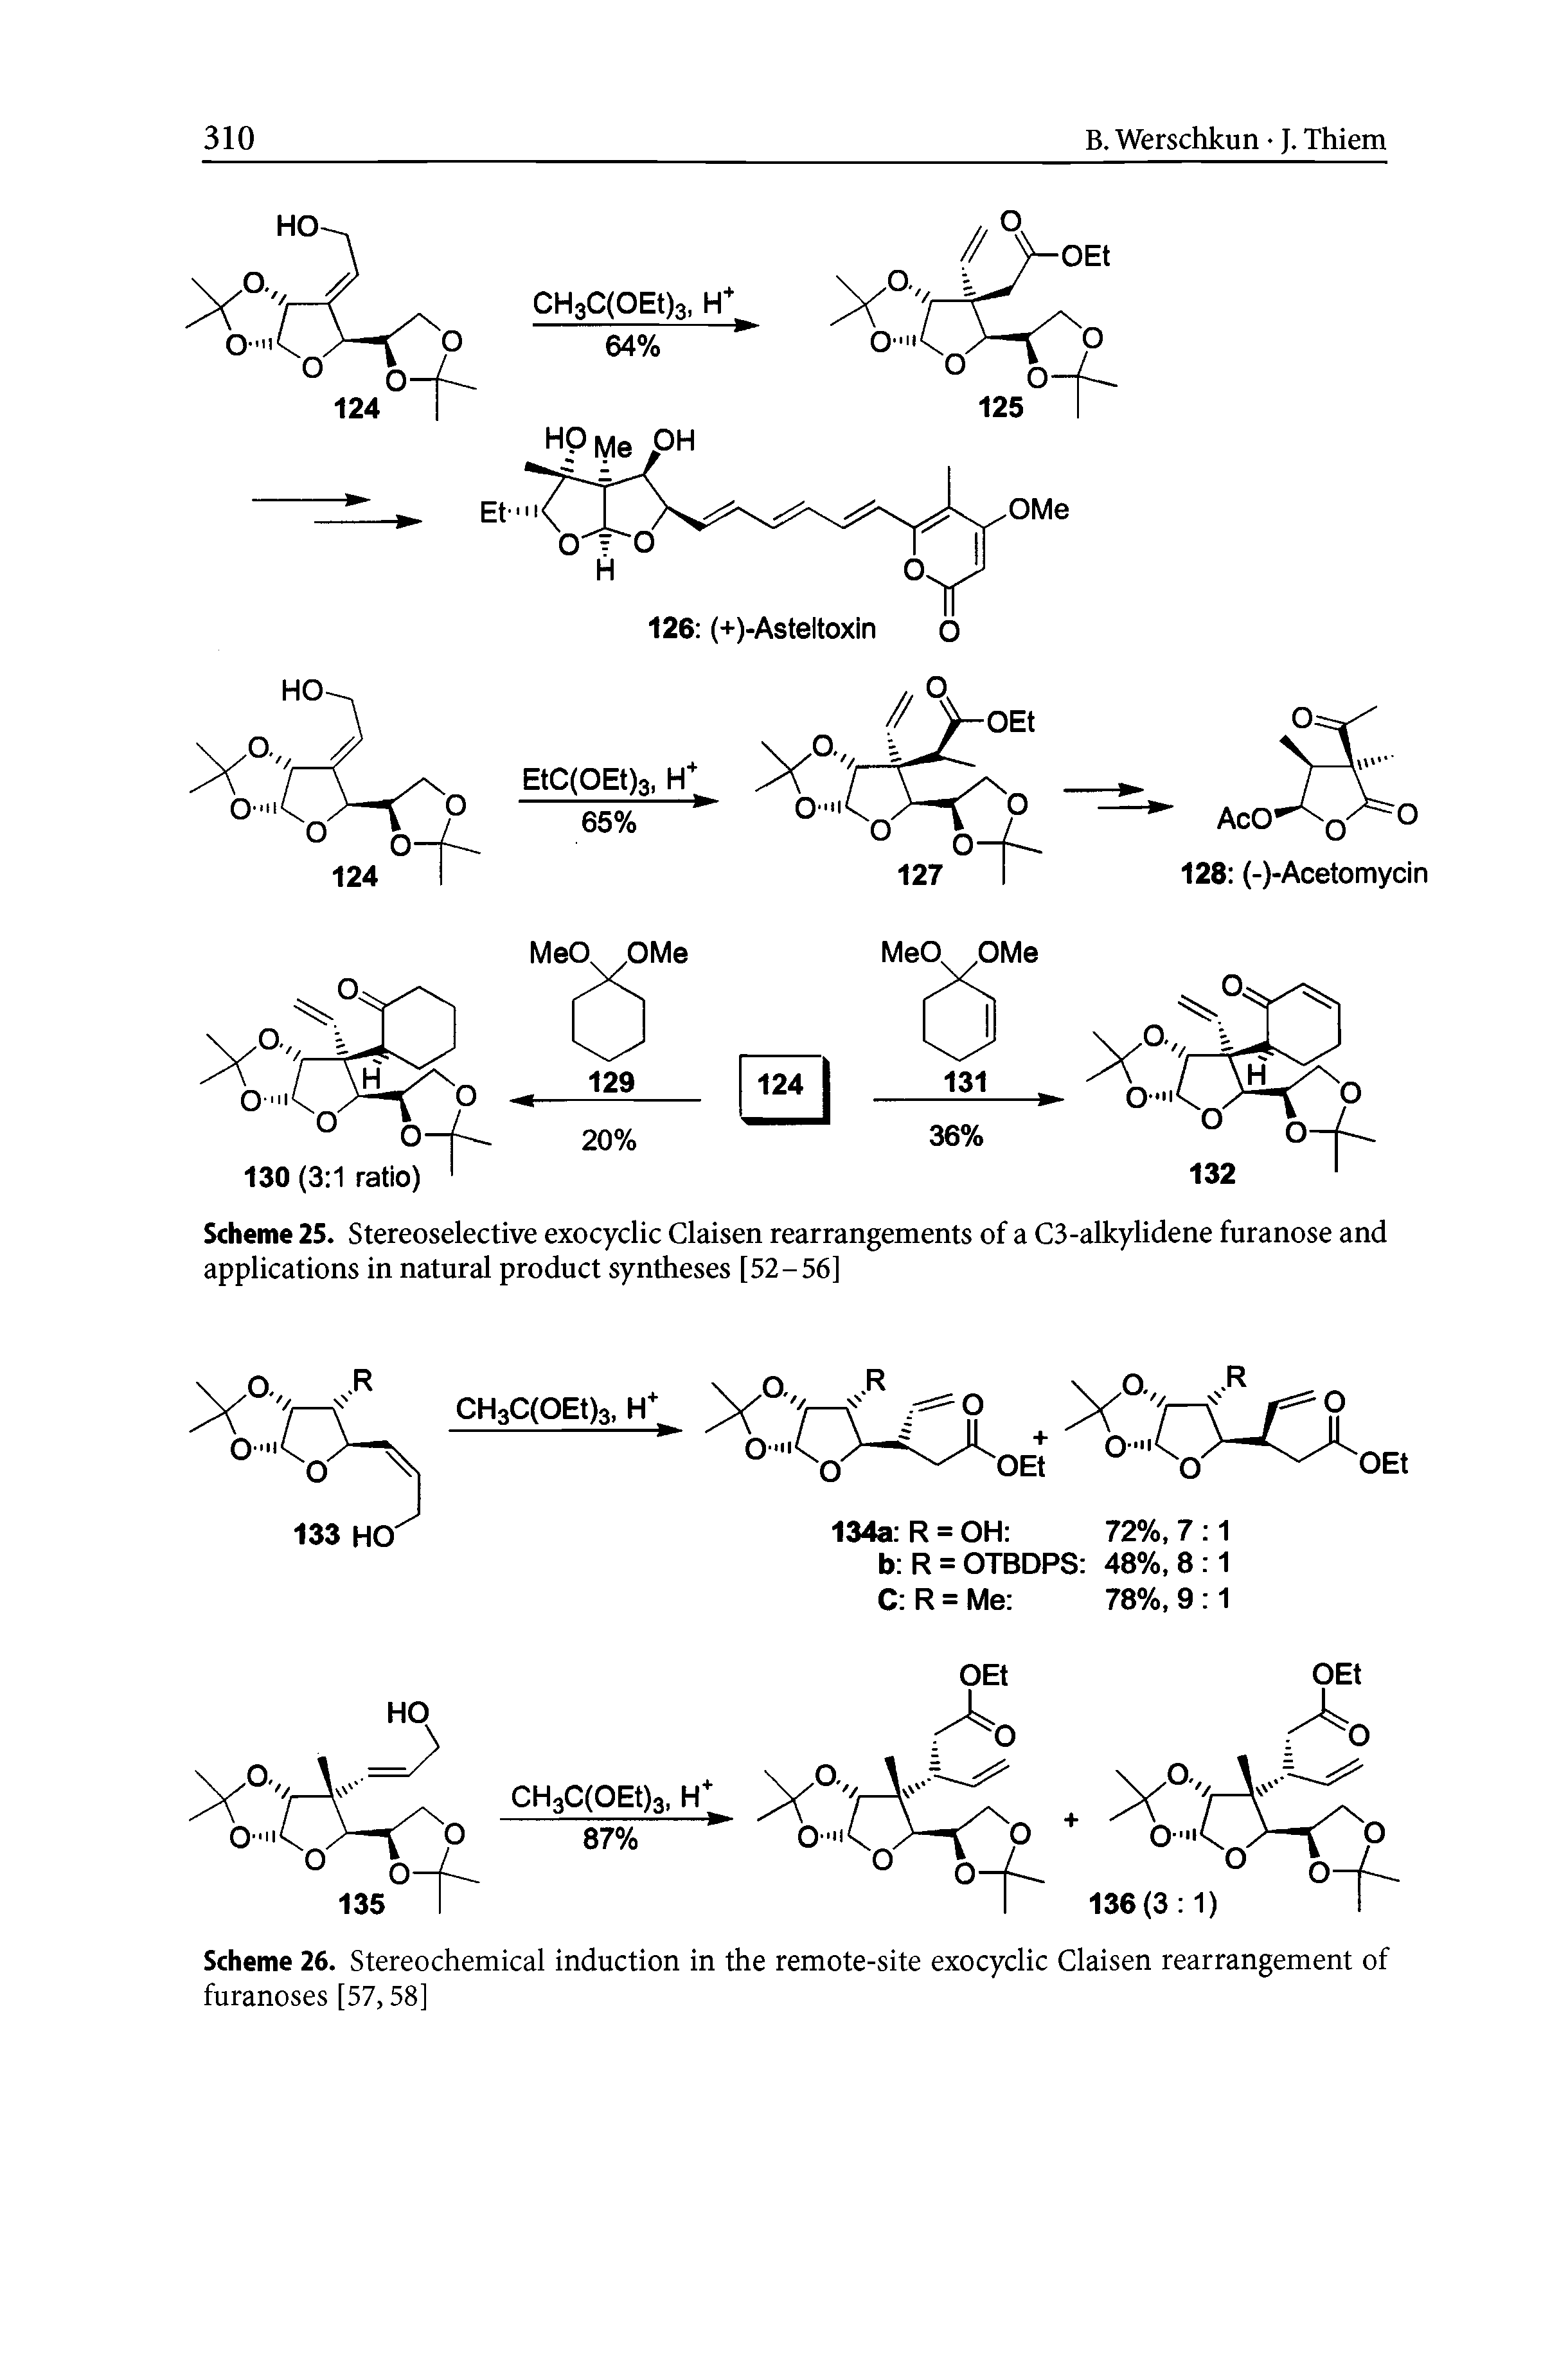 Scheme 25. Stereoselective exocyclic Claisen rearrangements of a C3-alkylidene furanose and applications in natural product syntheses [52-56]...